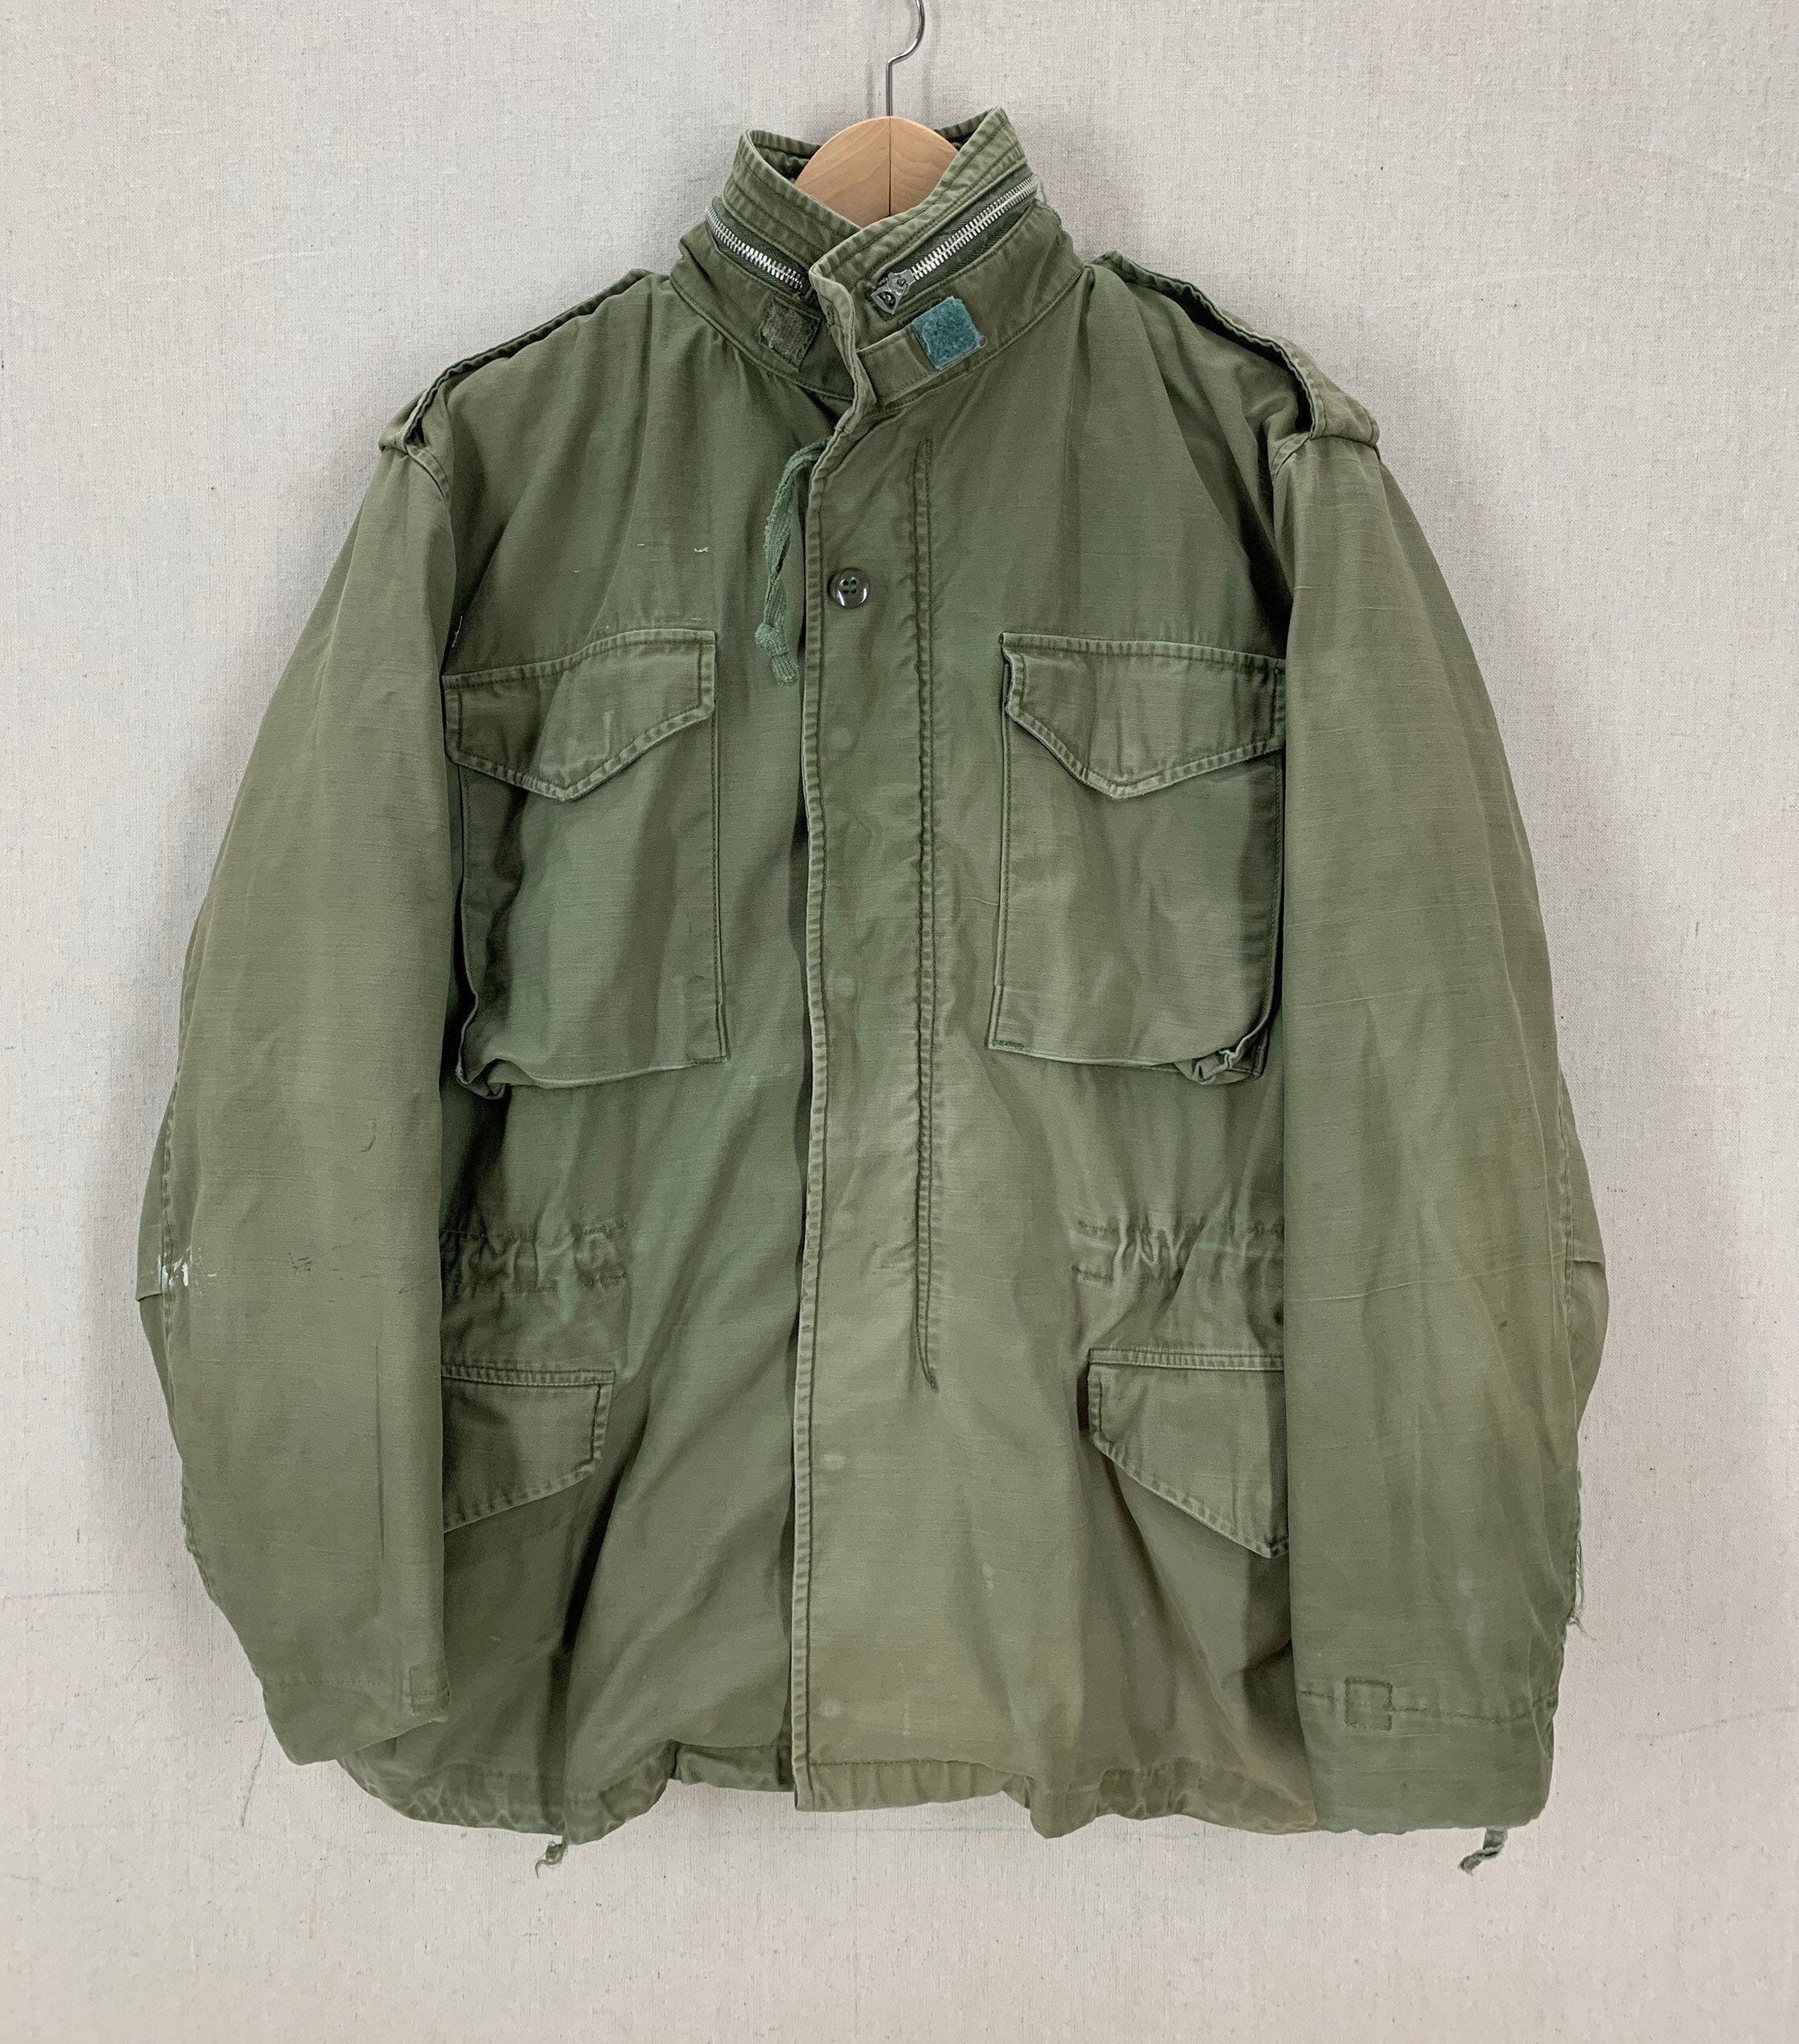 M65 Field Jacket for sale | Only 4 left at -70%